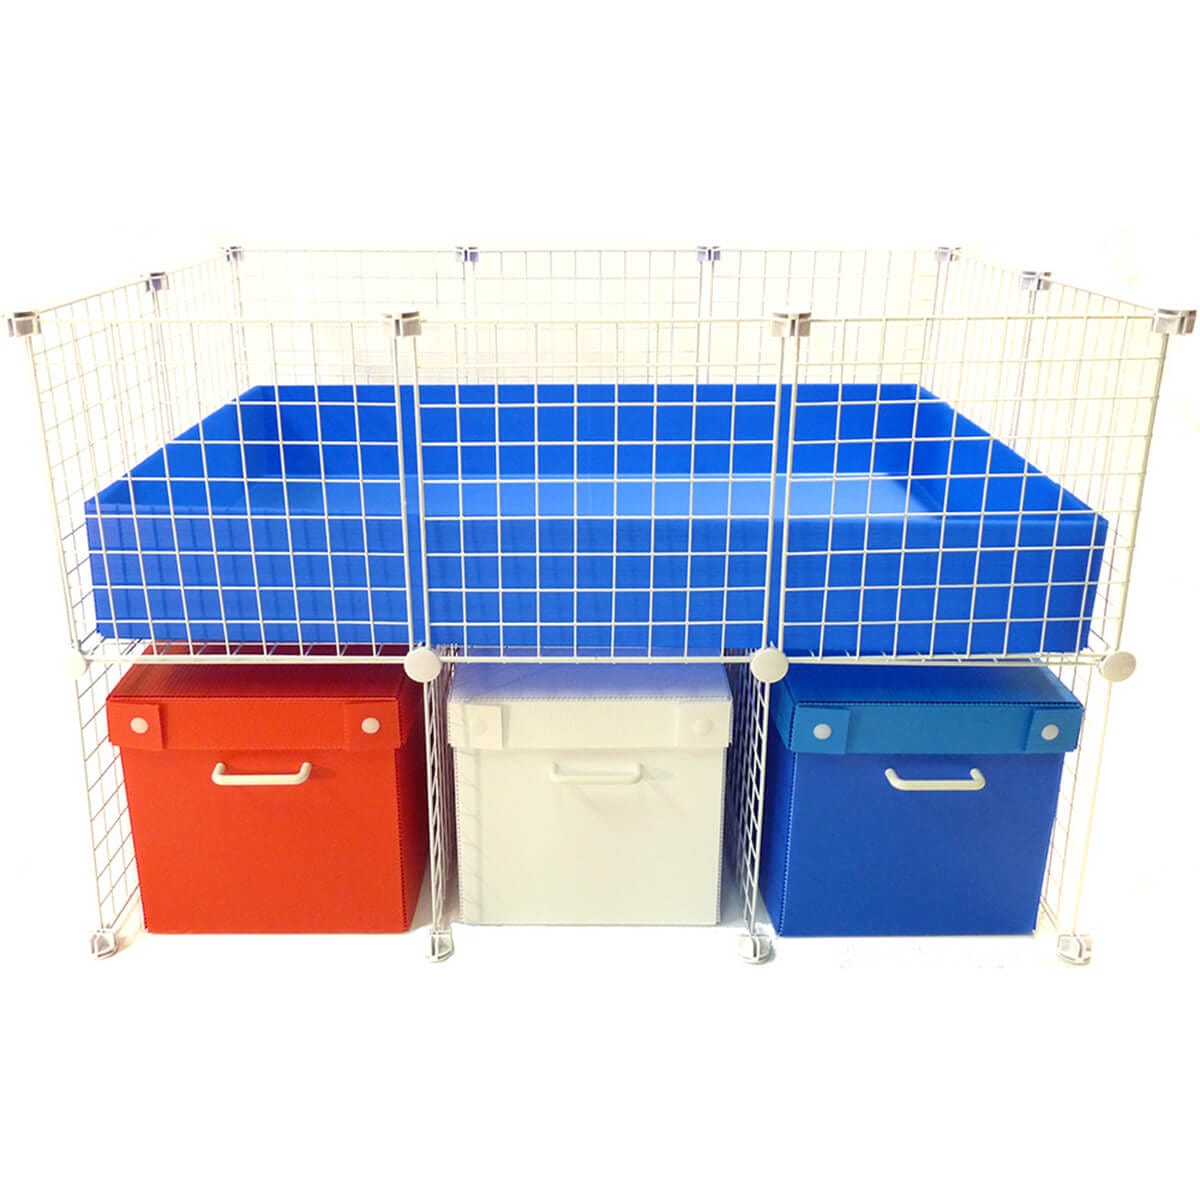 Three standard storage bins with covers under a small C&C guinea pig cage and stand